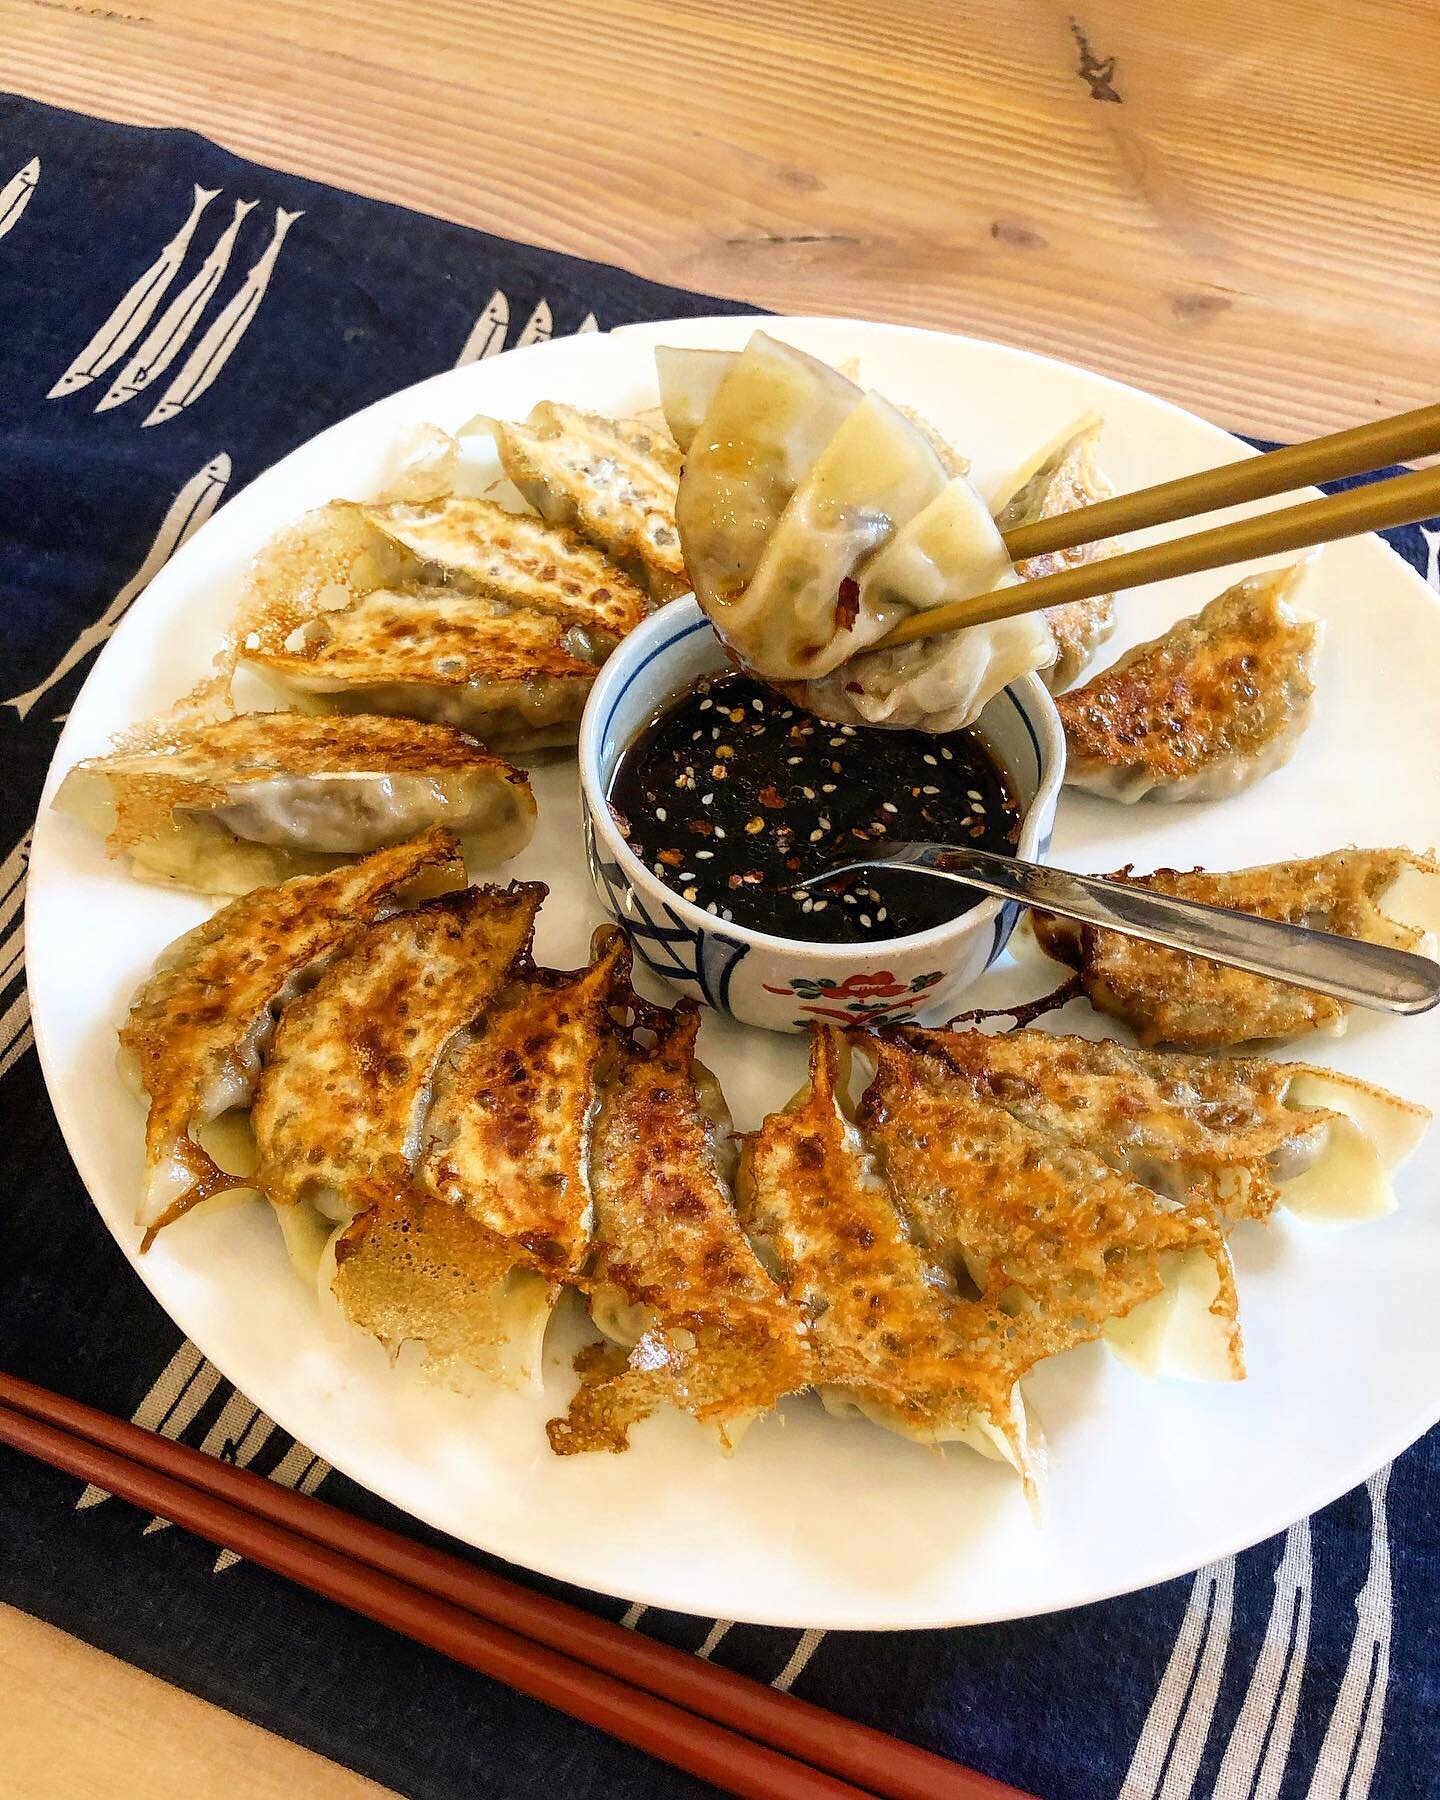 🥟🥟🥟🥟🥟🥟🥟
🔸16th of July, Friday (18.00-20.30 )
Japanese pan fried veggie Gyoza dumplings from scratch class🥟🥟🥟🥟🥟🥟

❣️Participation Fee is 300kr / person.

You can check more information from this link on my Facebook👇👇👇

https://fb.me/e